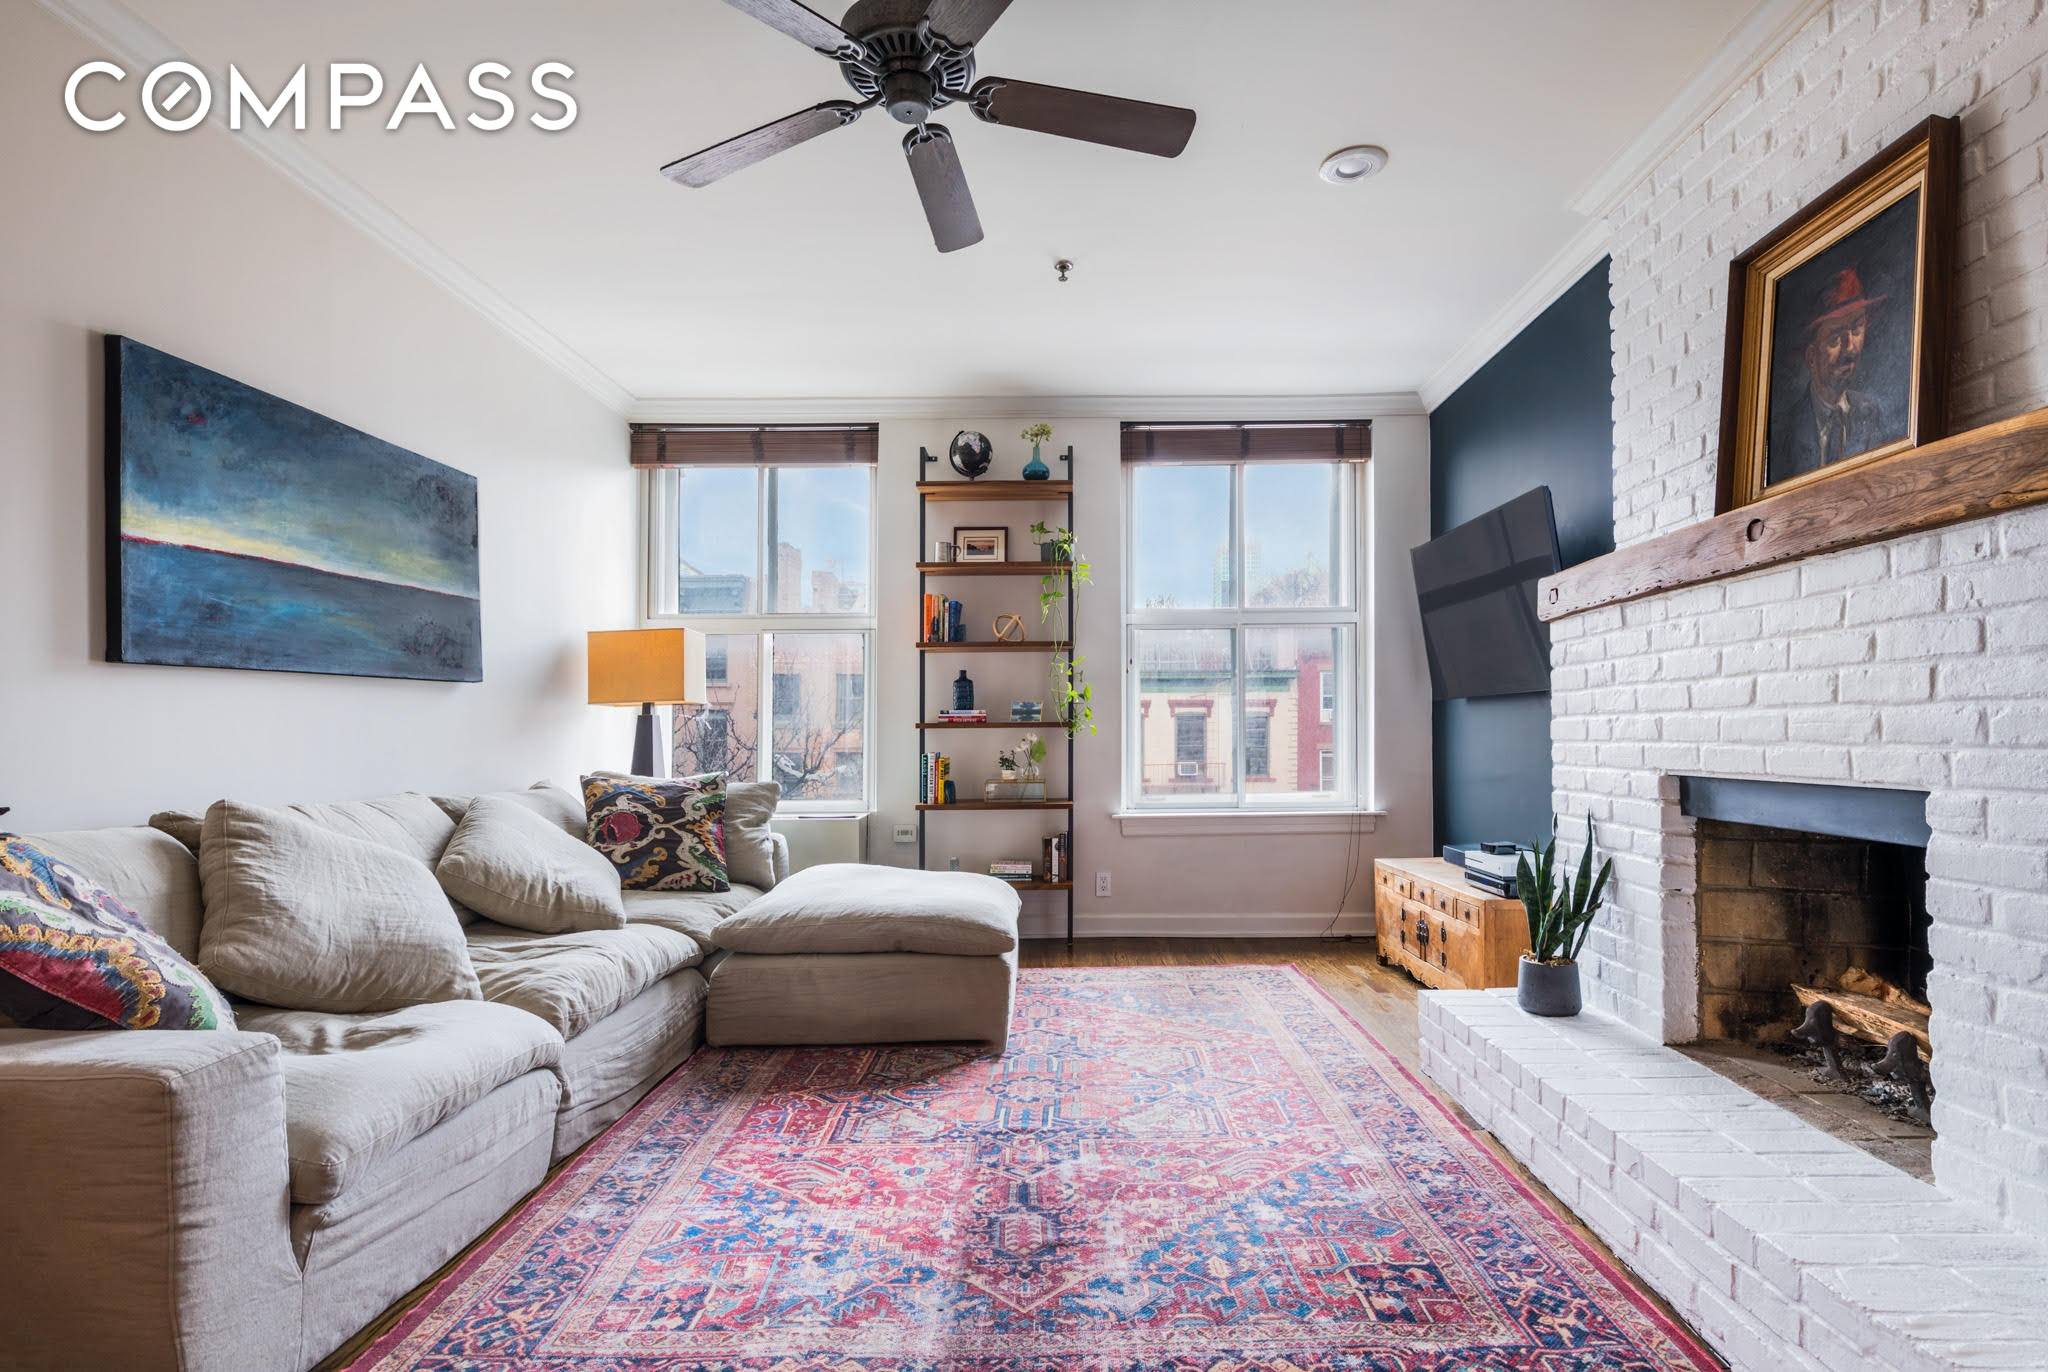 Unit A3B at 124 Atlantic Avenue otherwise known as the A amp ; P Building is a 1 bed, 1 bath cooperative apartment perfectly situated on the Cobble Hill Brooklyn ...